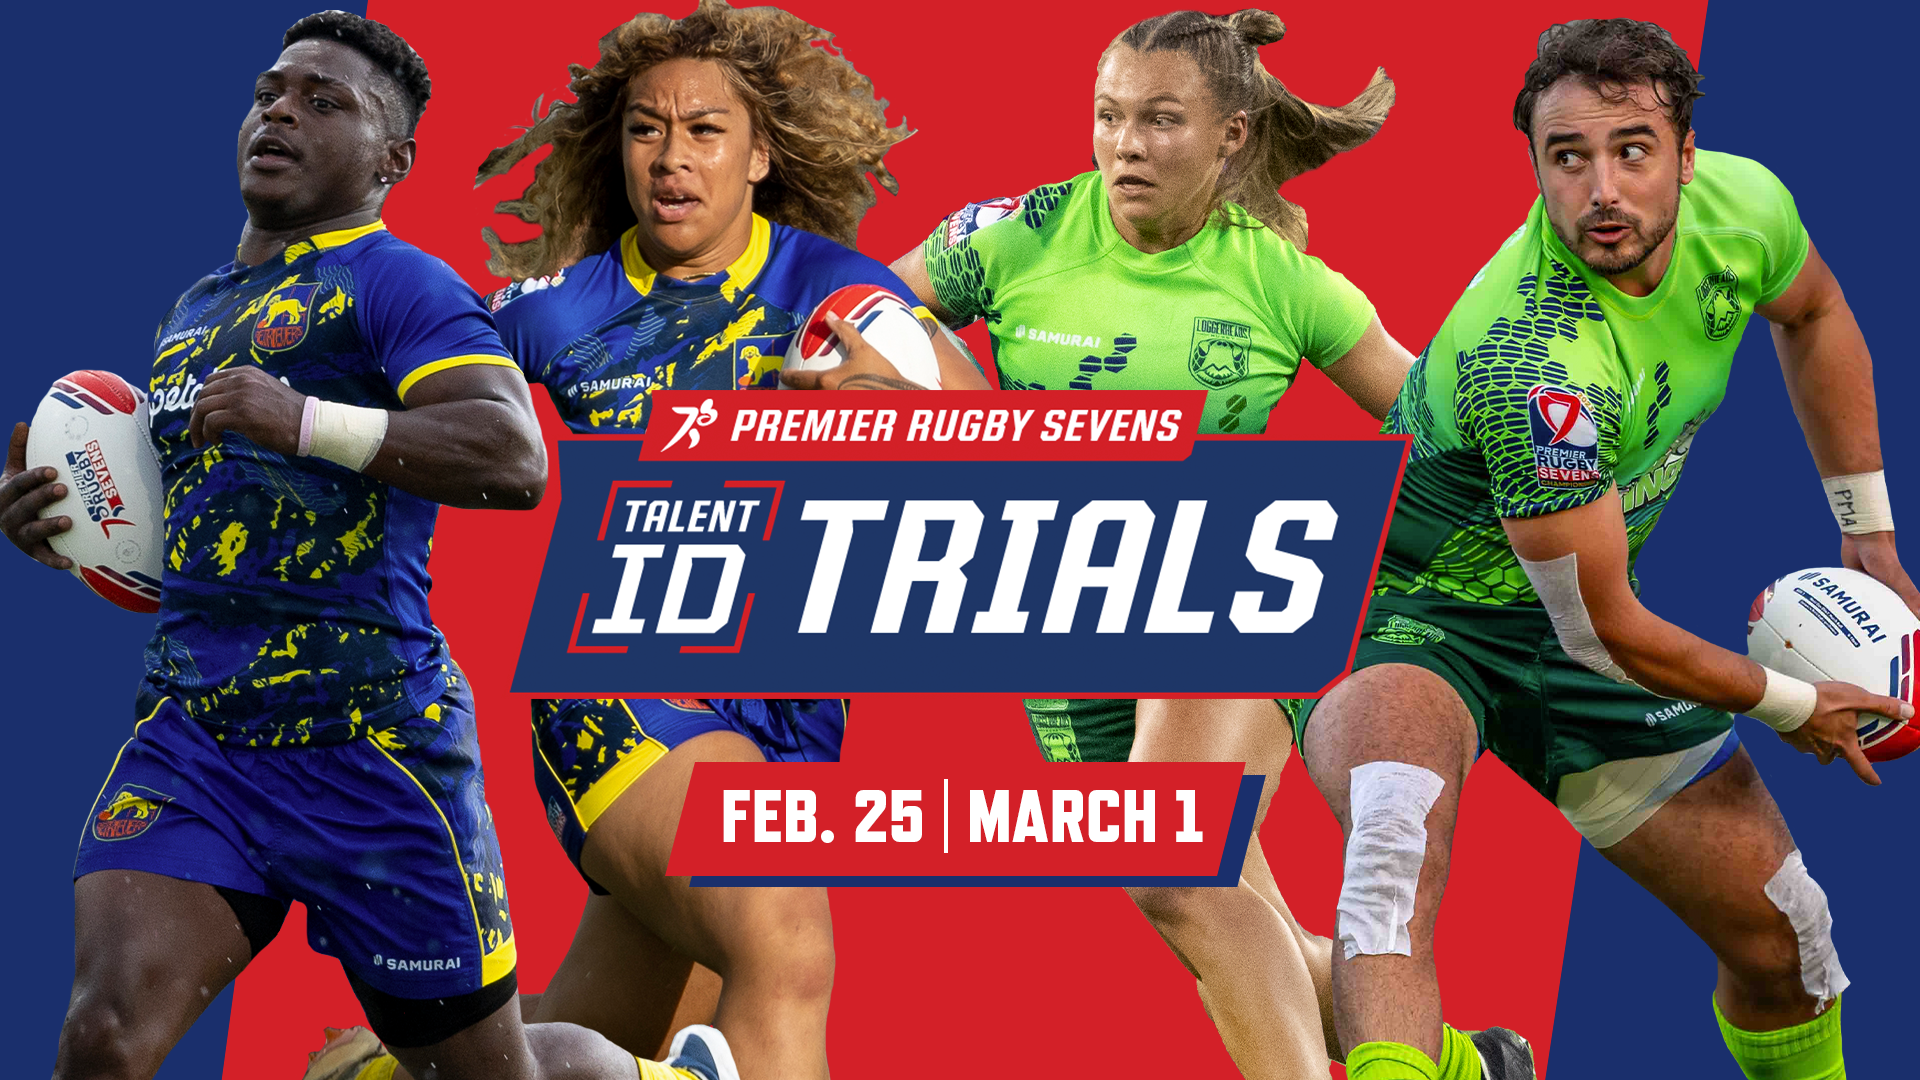 Premier Rugby Sevens to Hold Two Open Tryouts in California